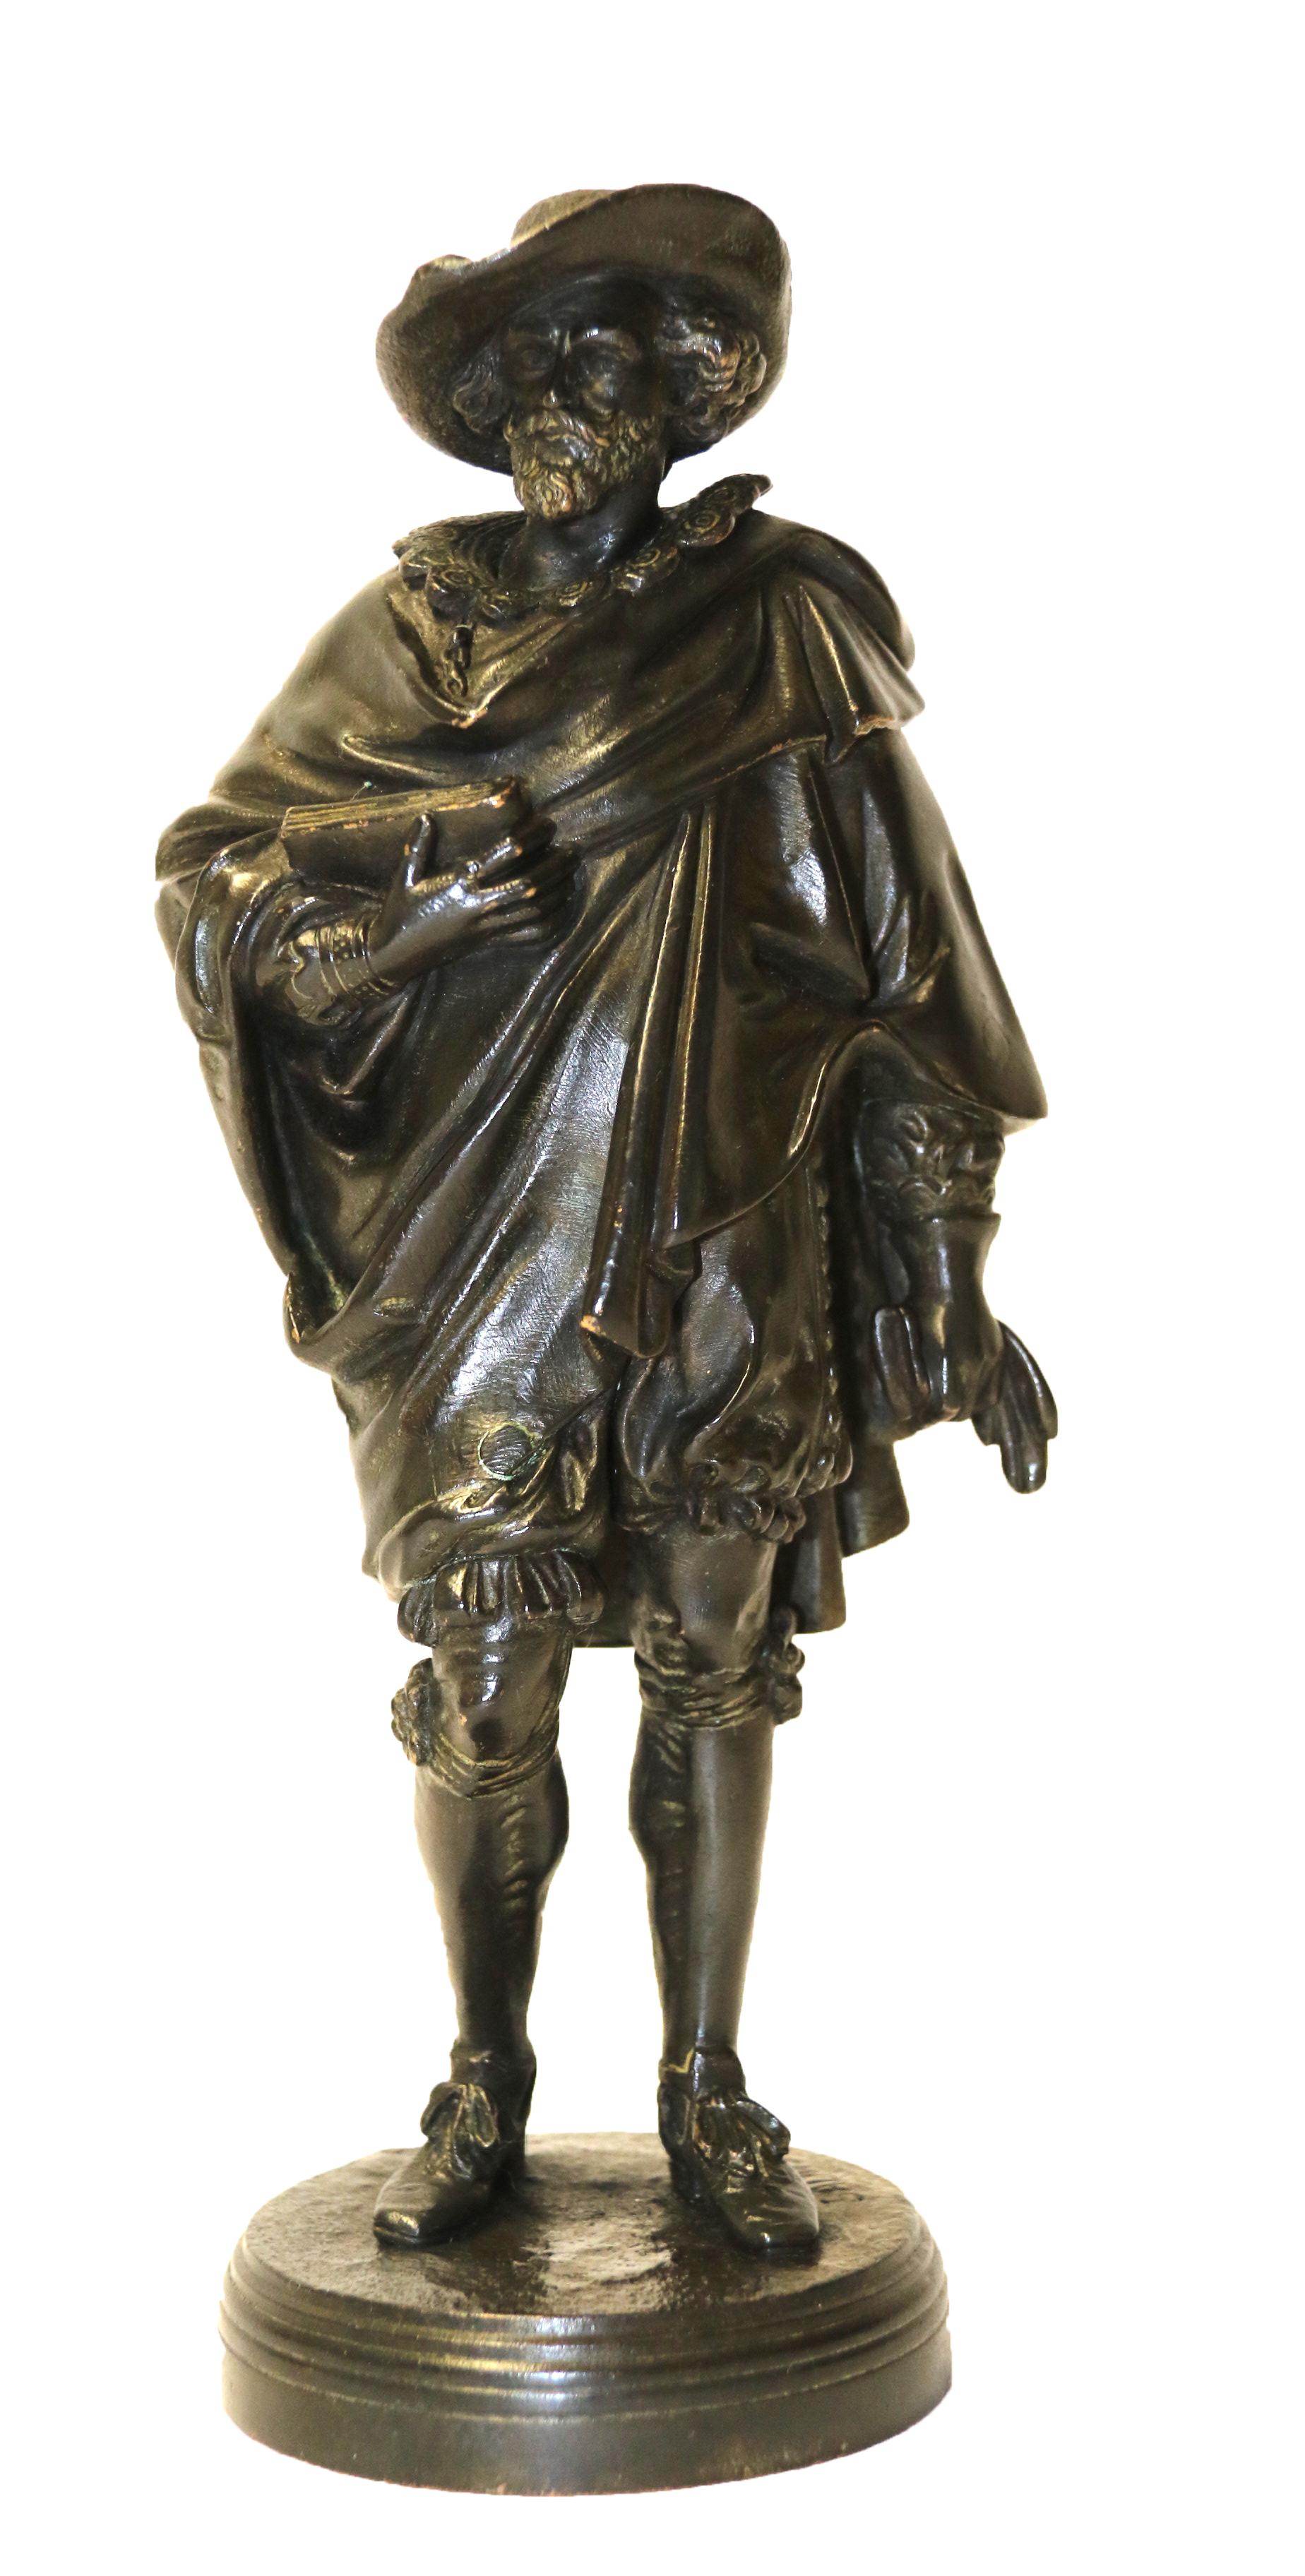 A superbly detailed fine cast bronze study of Van Dyck by the French sculptor Jean Jules Salmson (1823-1902).
Salmson regularly exhibited his work at the Salon in Paris from 1859 and worked on numerous commissions including statues of Shakespeare,